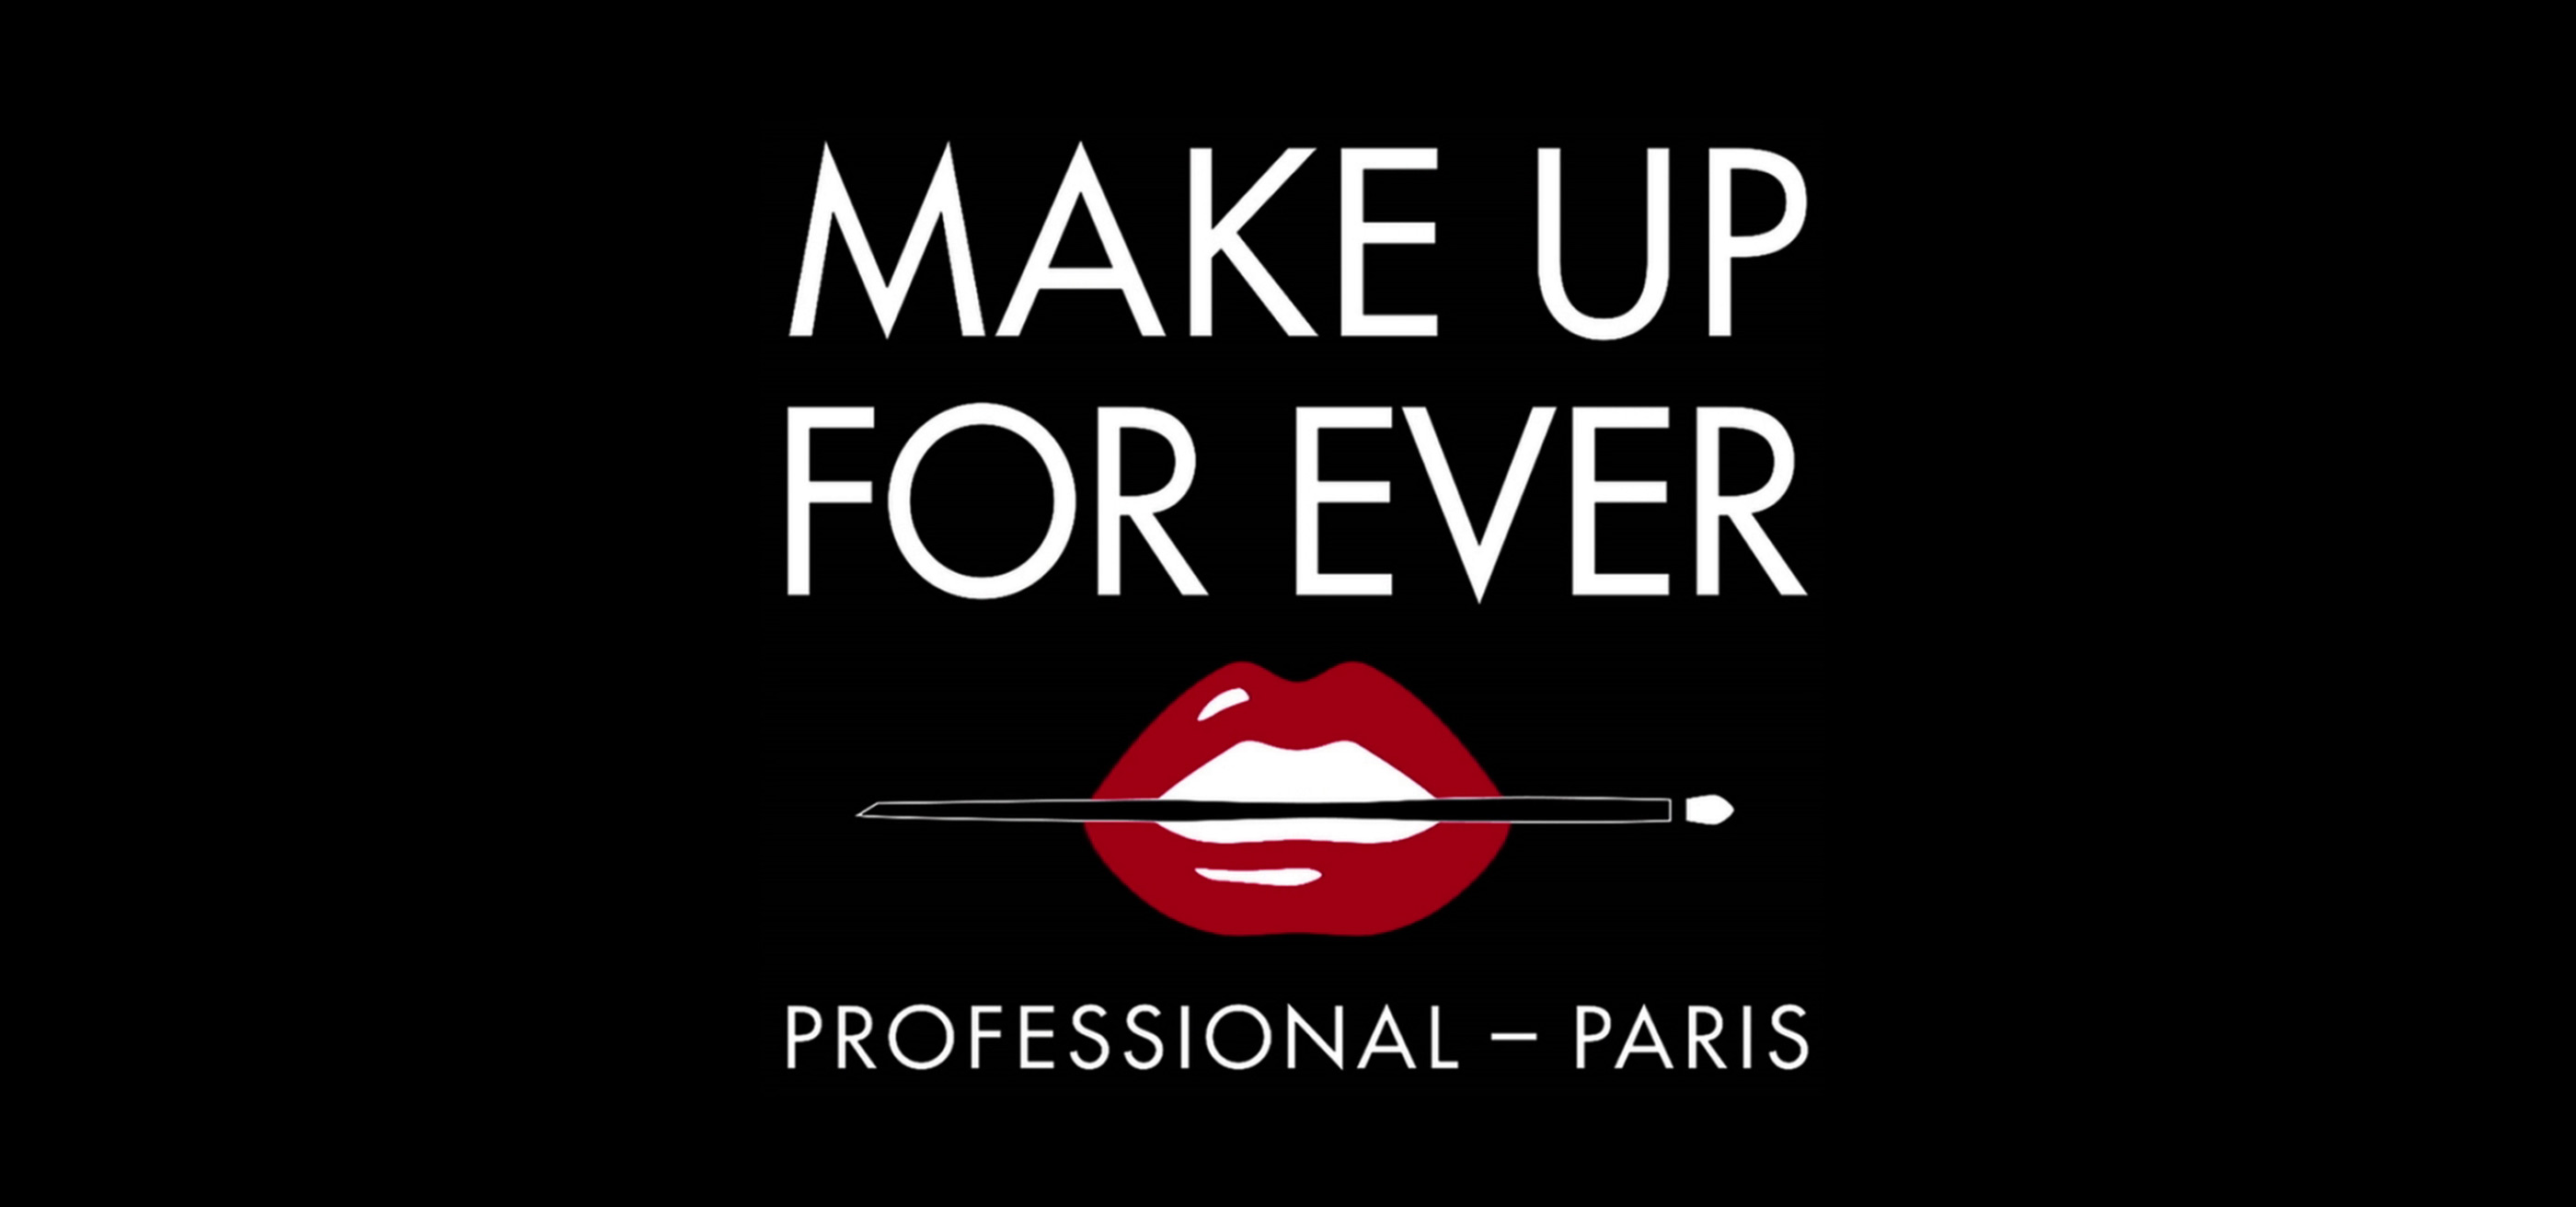 Make Up For Ever, maquillage professionnel - Parfums & Cosmétiques - LVMH